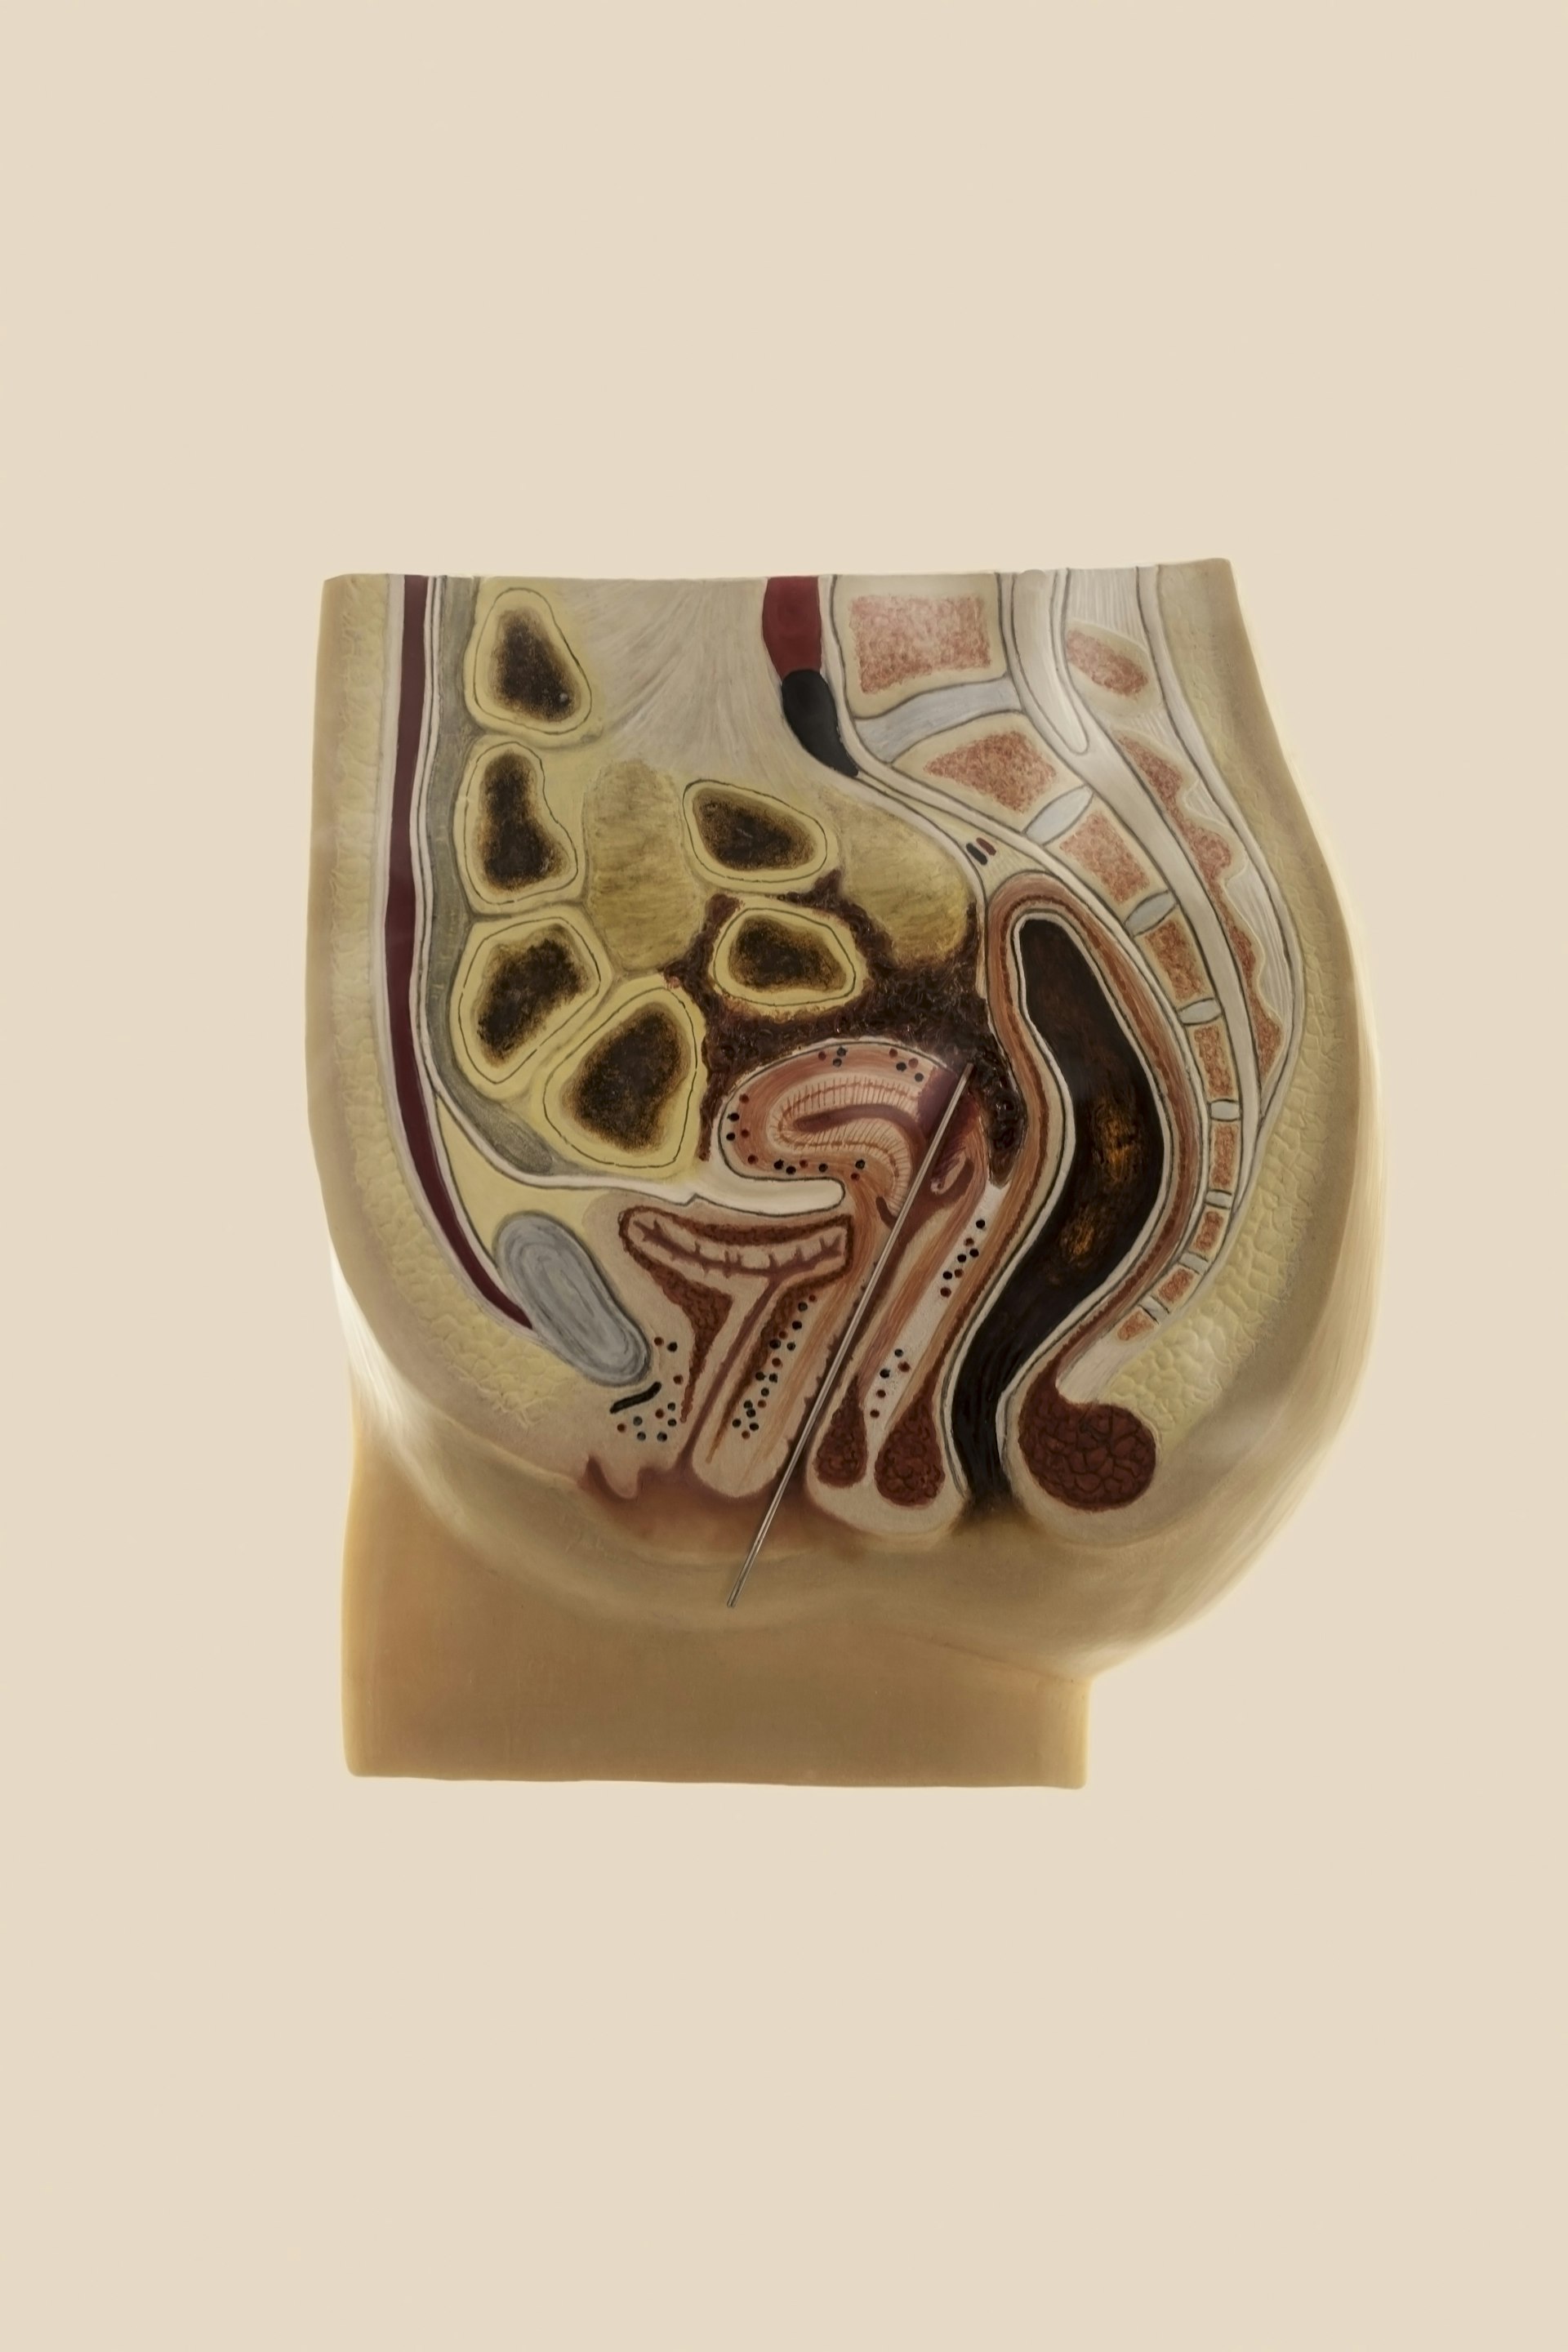 3D cross-section illustrating a knitting-needle abortion.